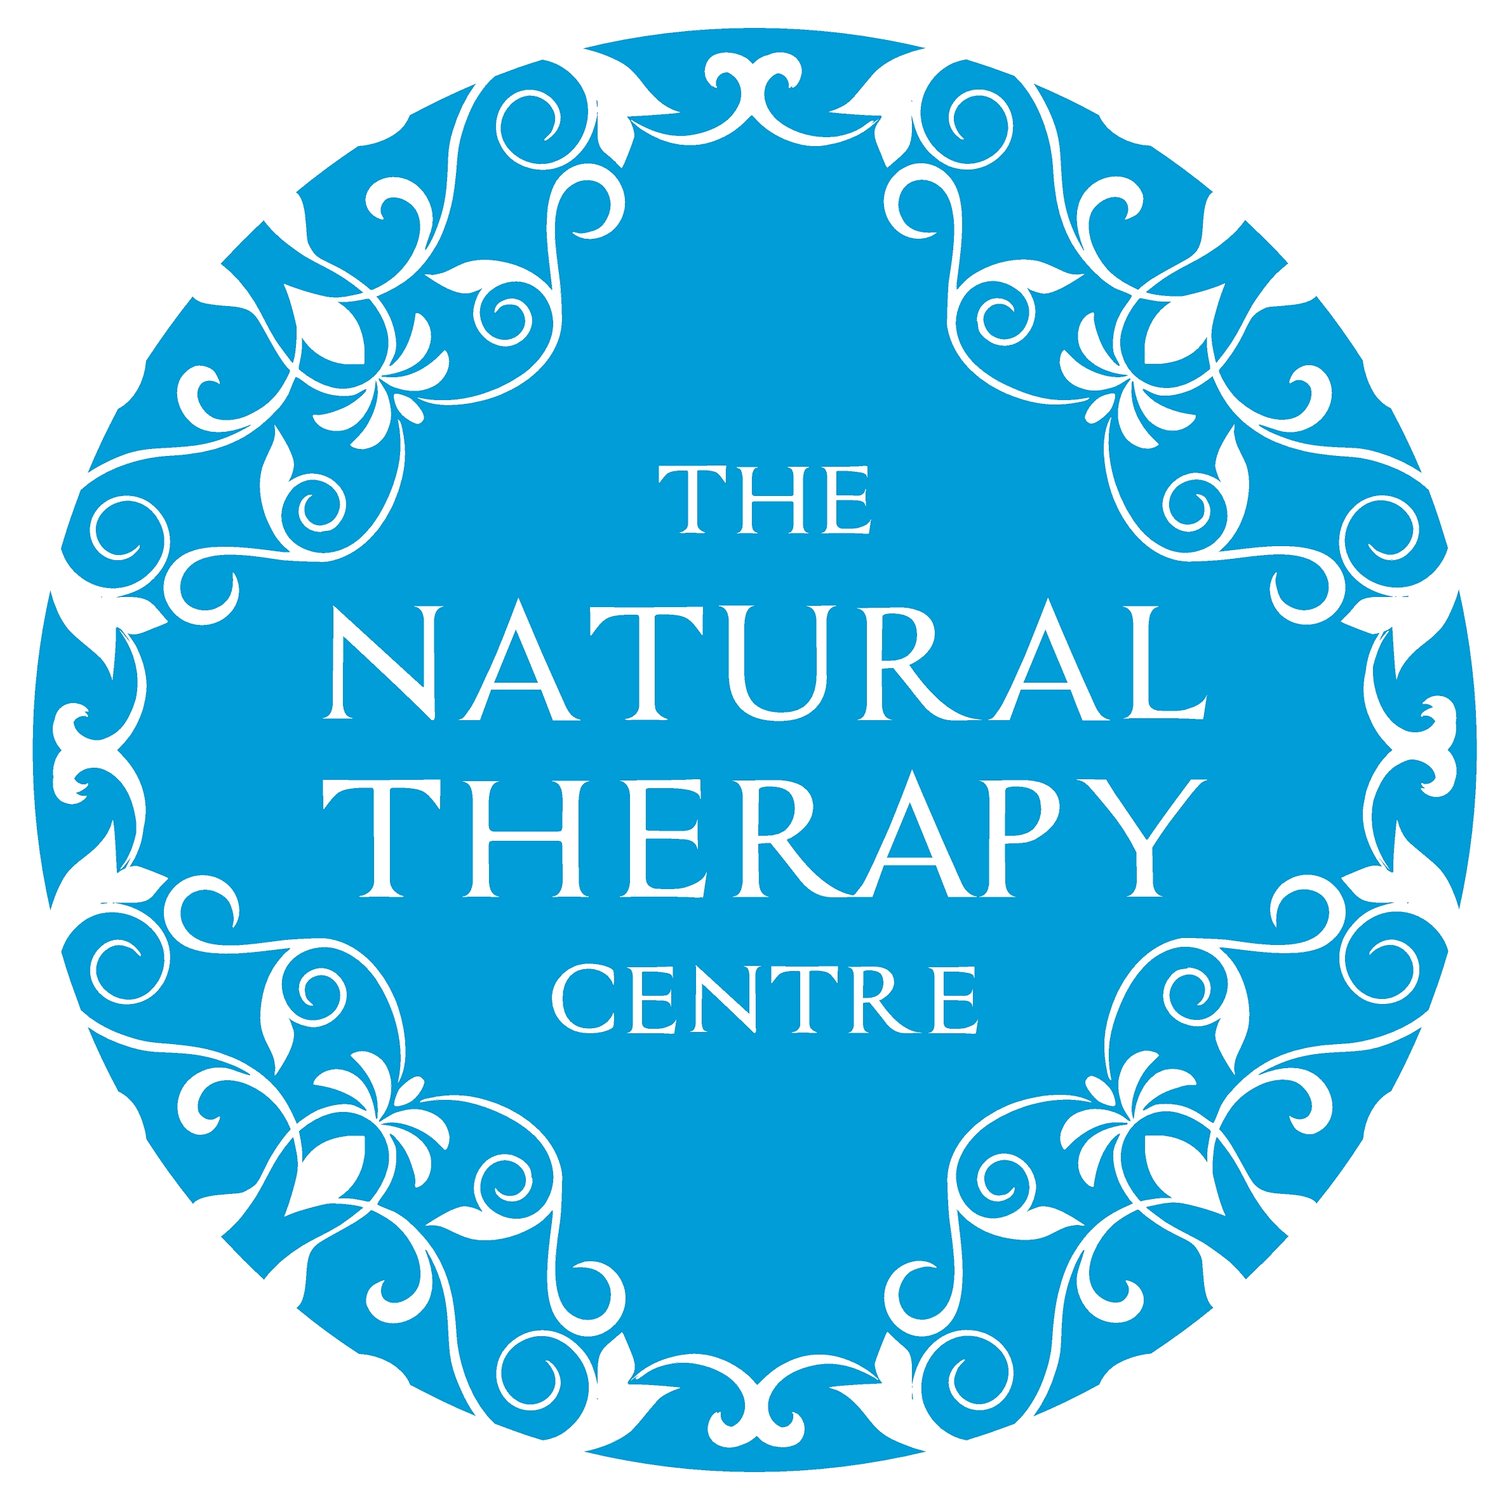 The Natural Therapy Centre